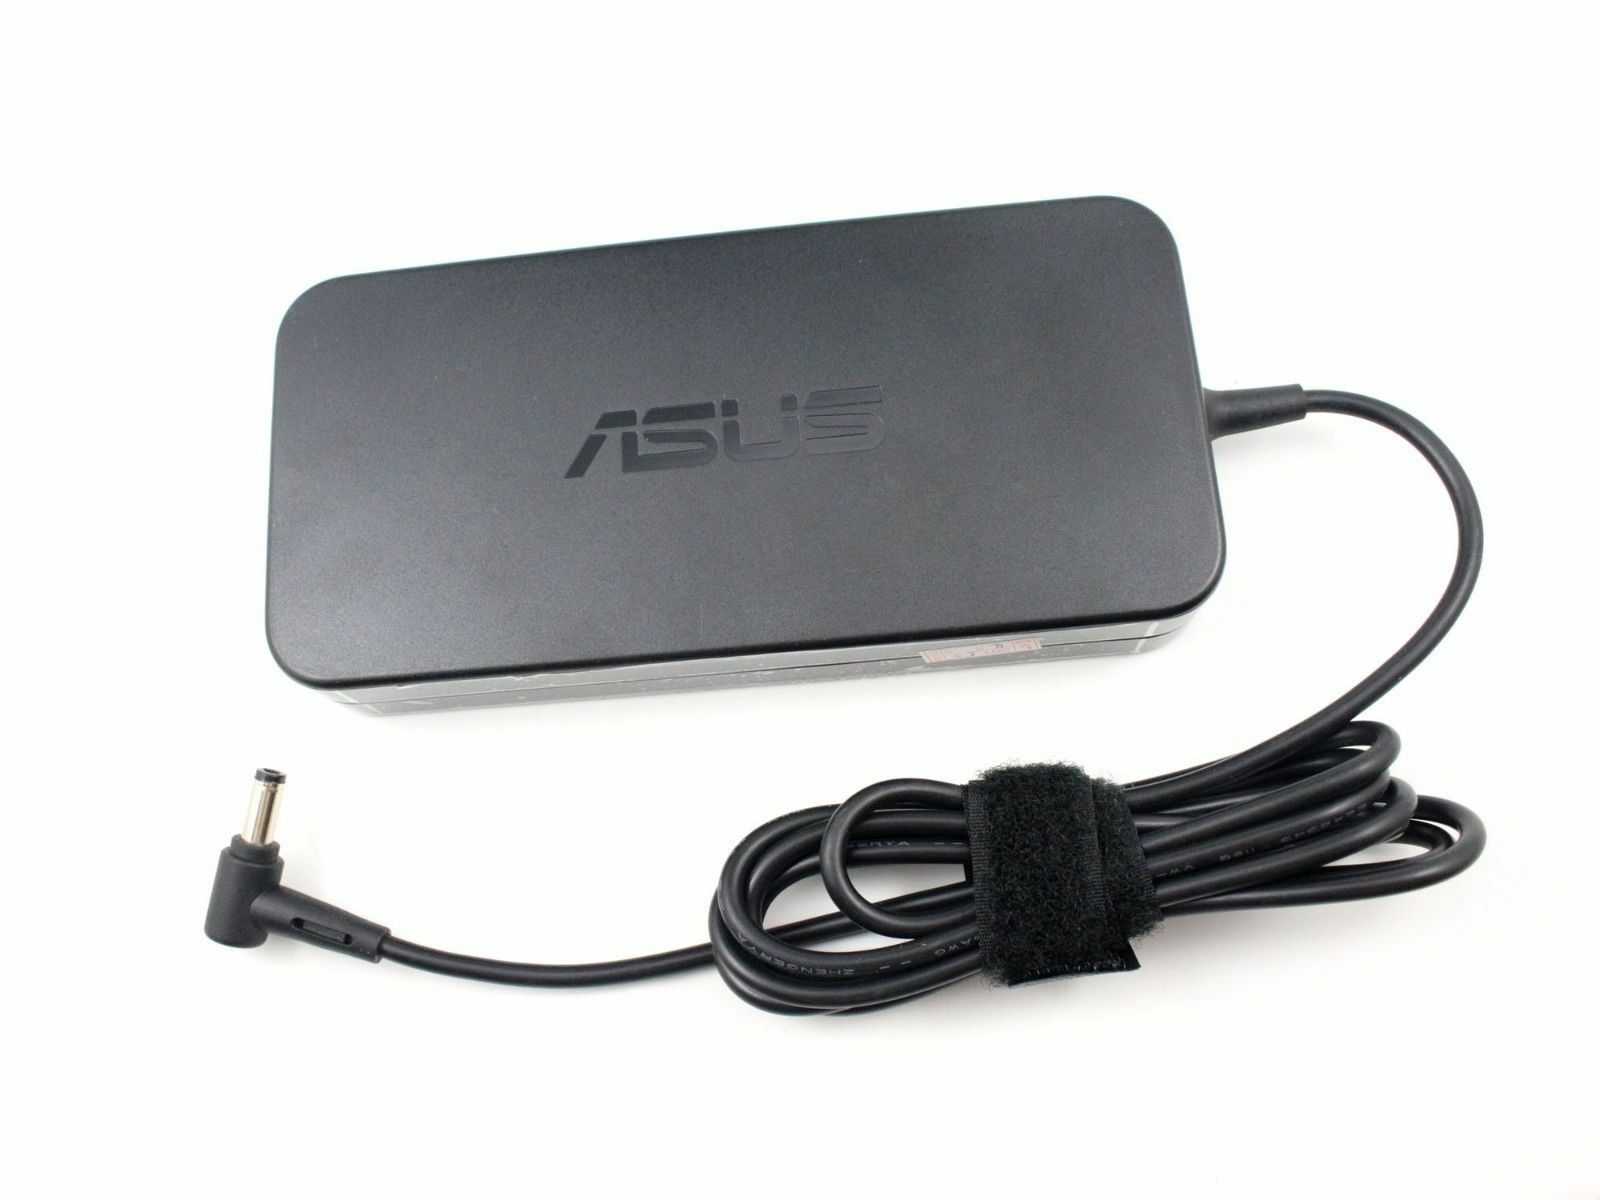 NEW Original 6.32A 120W ASUS FX553VD-DM917T FX553VD-DM592T AC Power Adapter Charger Charger